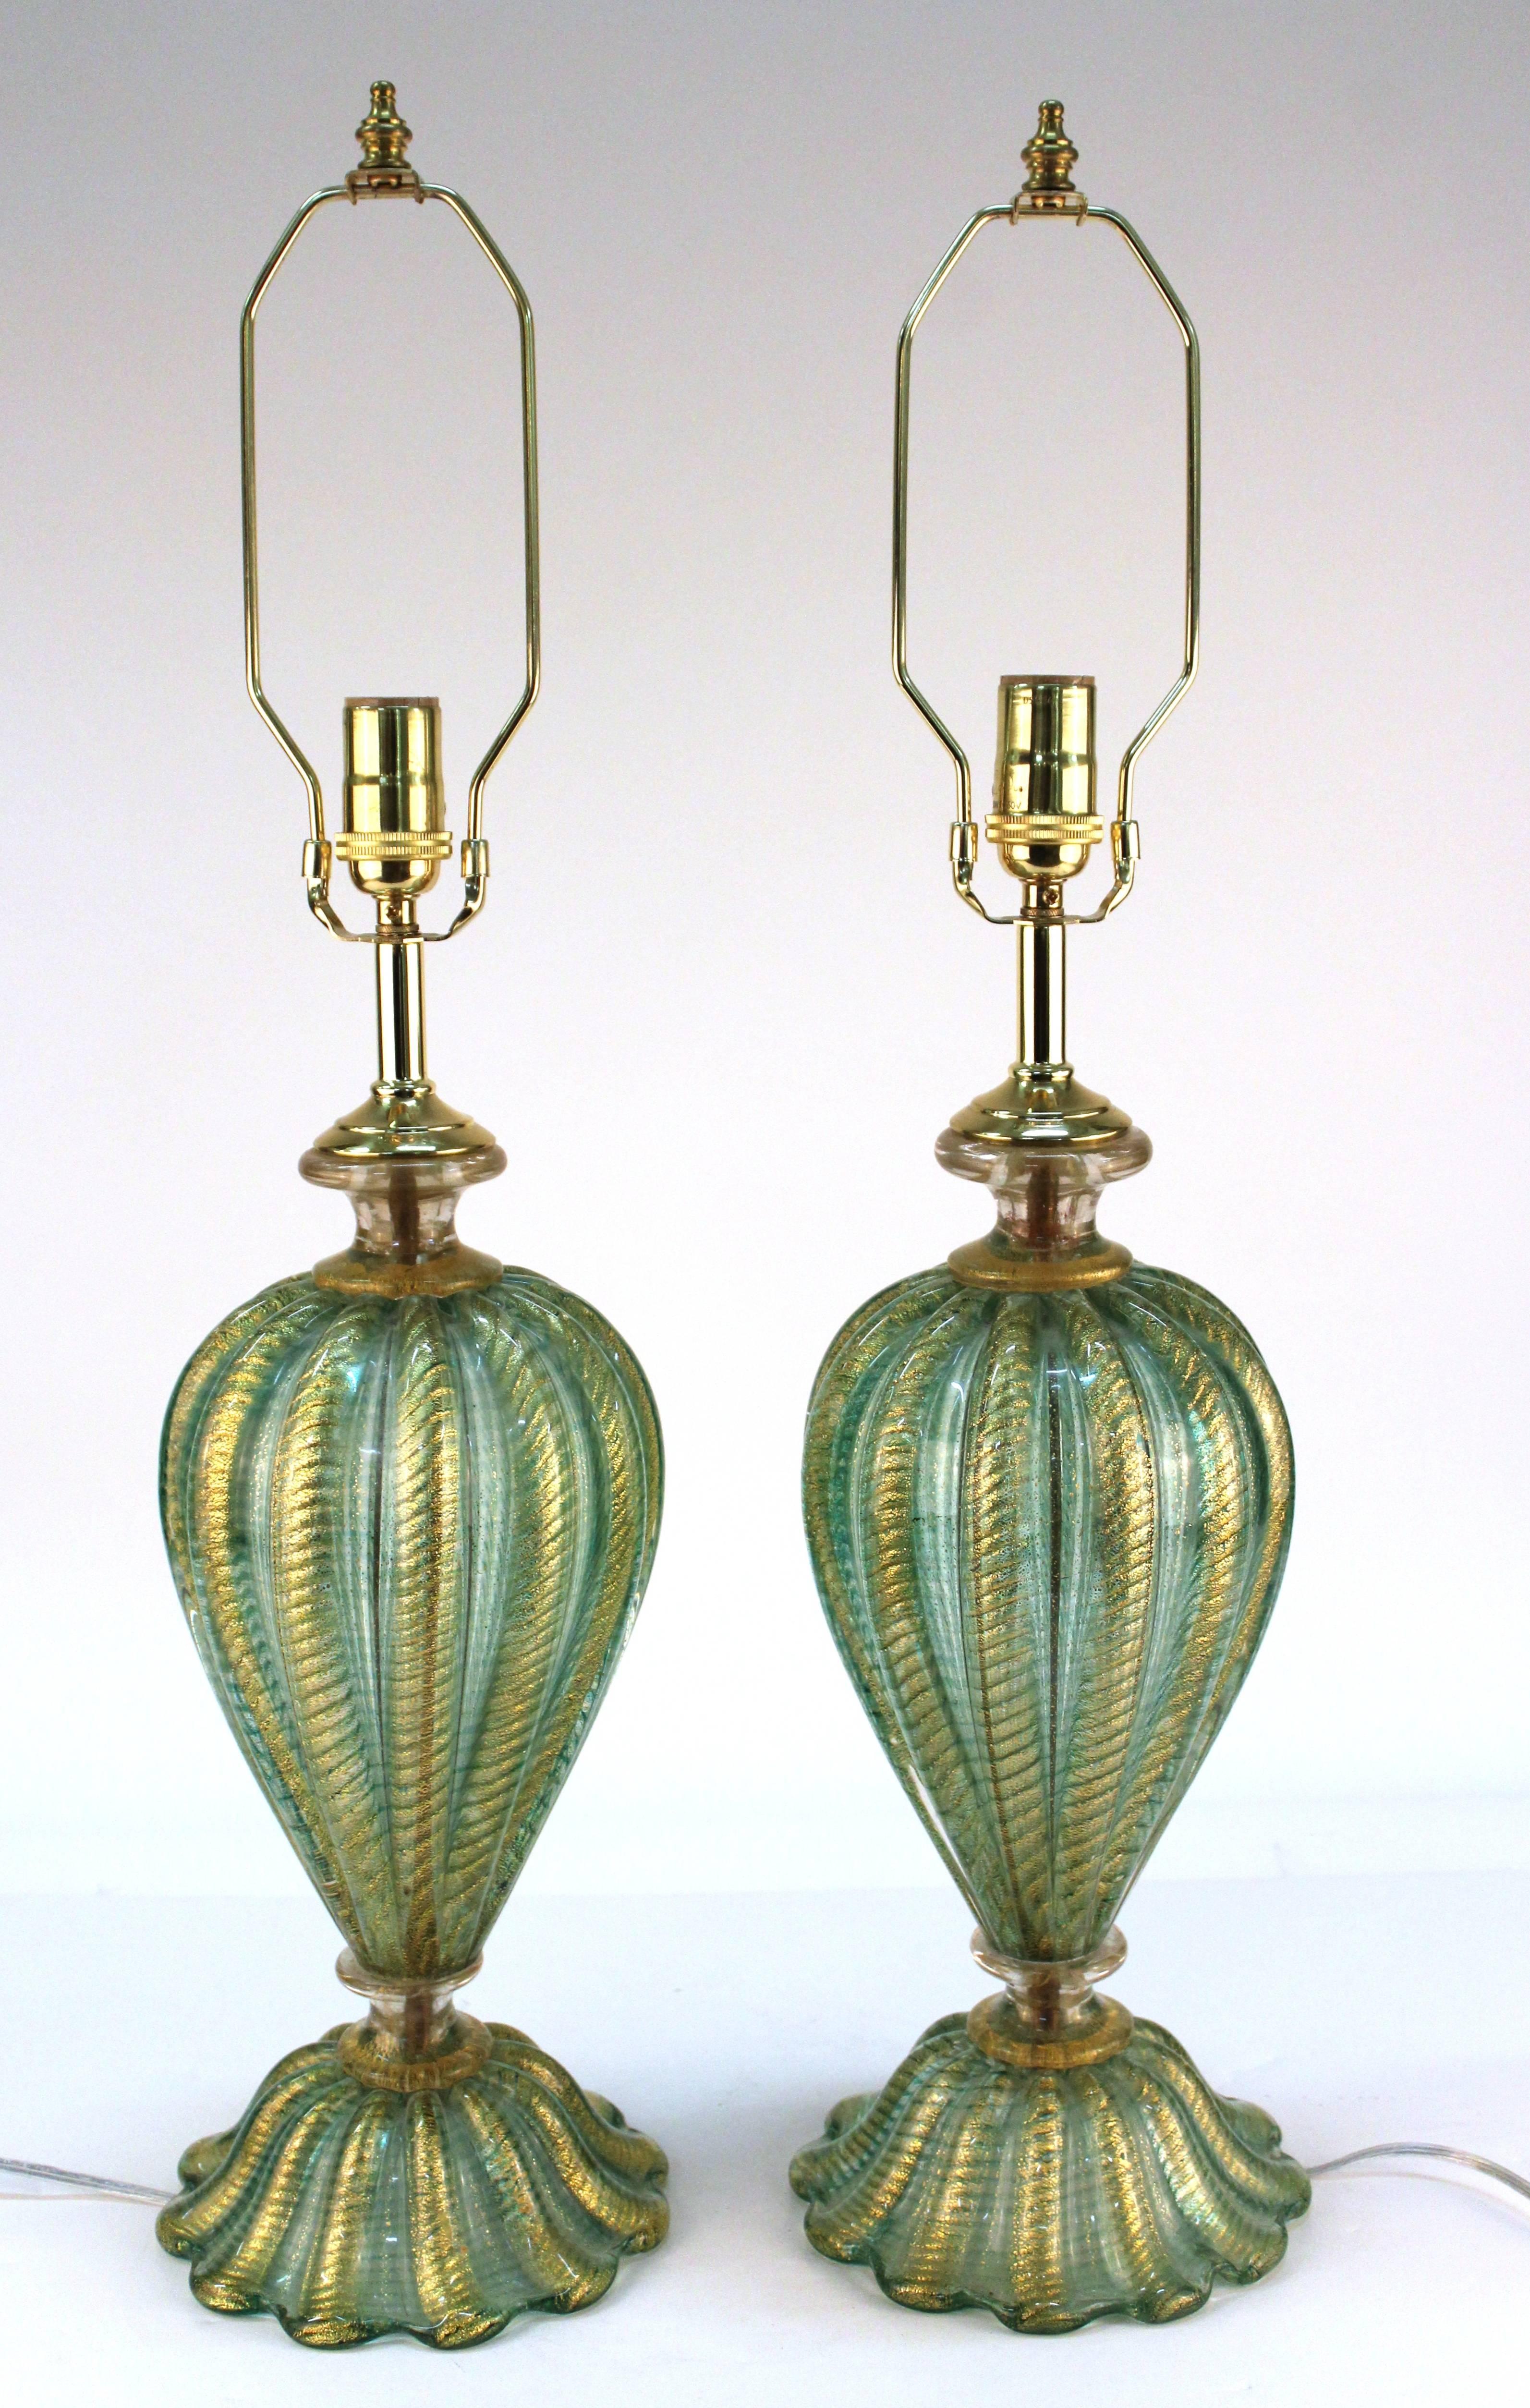 Gold flecks are present throughout these lobed Barovier and Toso Murano glass lamps. These date from the mid-20th century, circa 1960s and are in excellent vintage condition consistent with age and use. 110896.